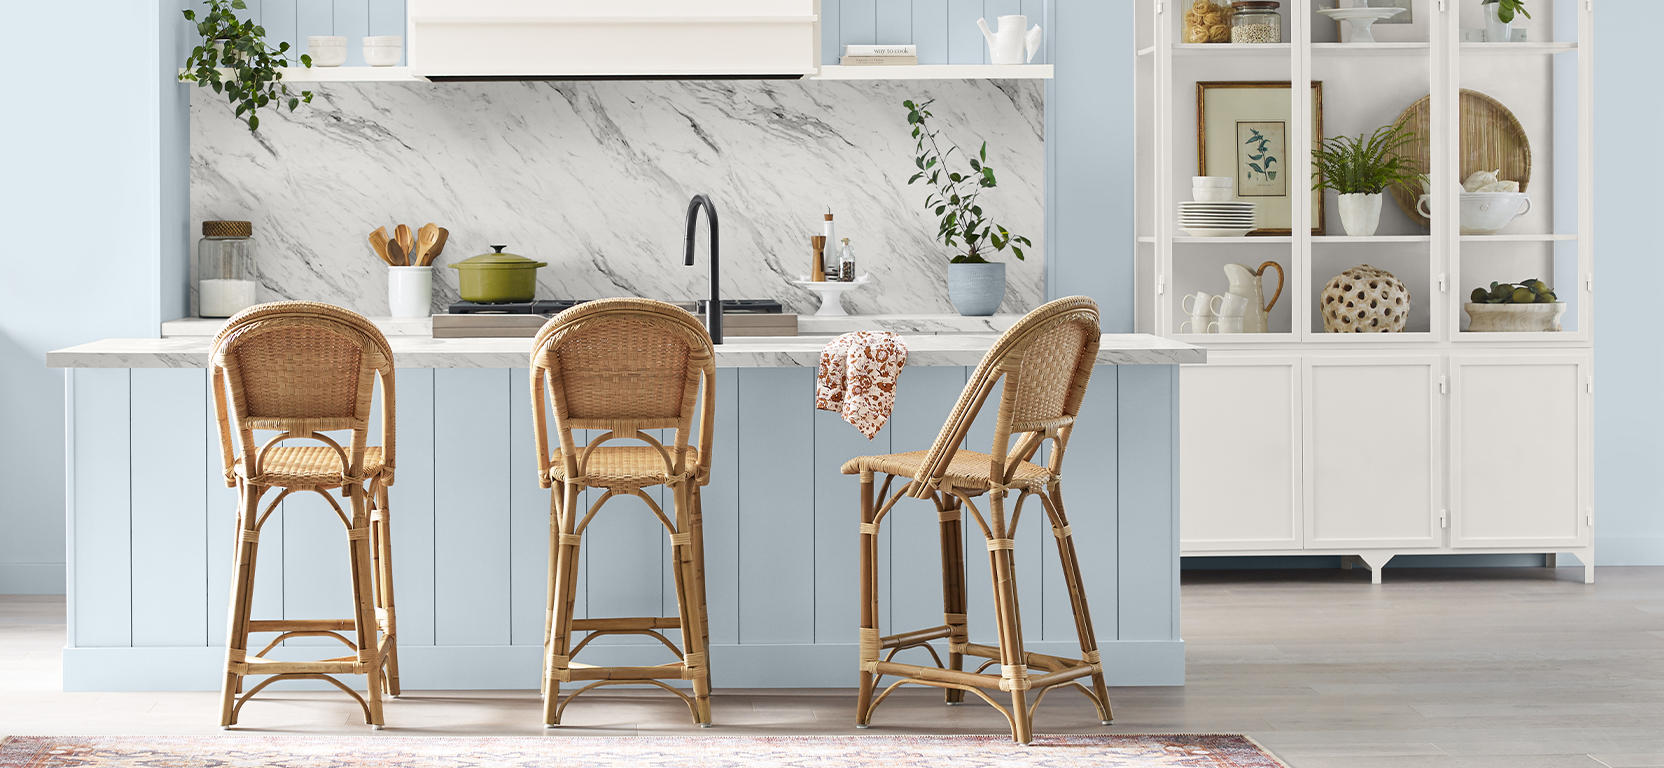 Kitchen with walls and island painted in the Sherwin-Williams Color of the Year, Upward, with rattan chairs, a white marble backsplash, and white cabinet displaying serving pieces and decorative accents.